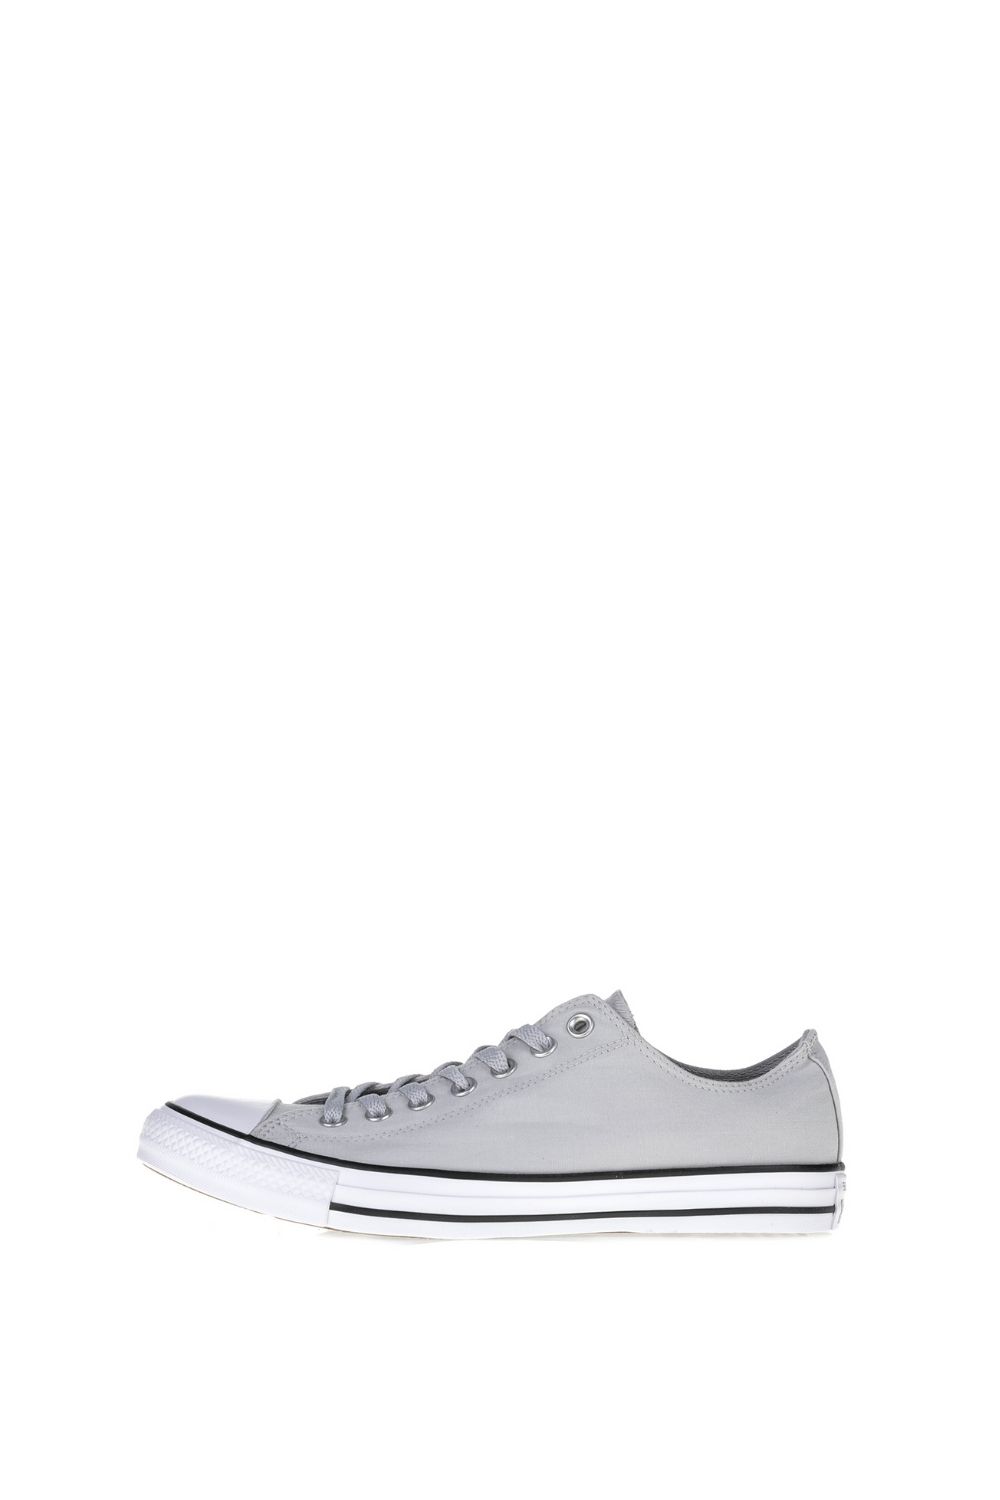 CONVERSE - Unisex ψηλά sneakers CONVERSE Chuck Taylor All Star Ox γκρι